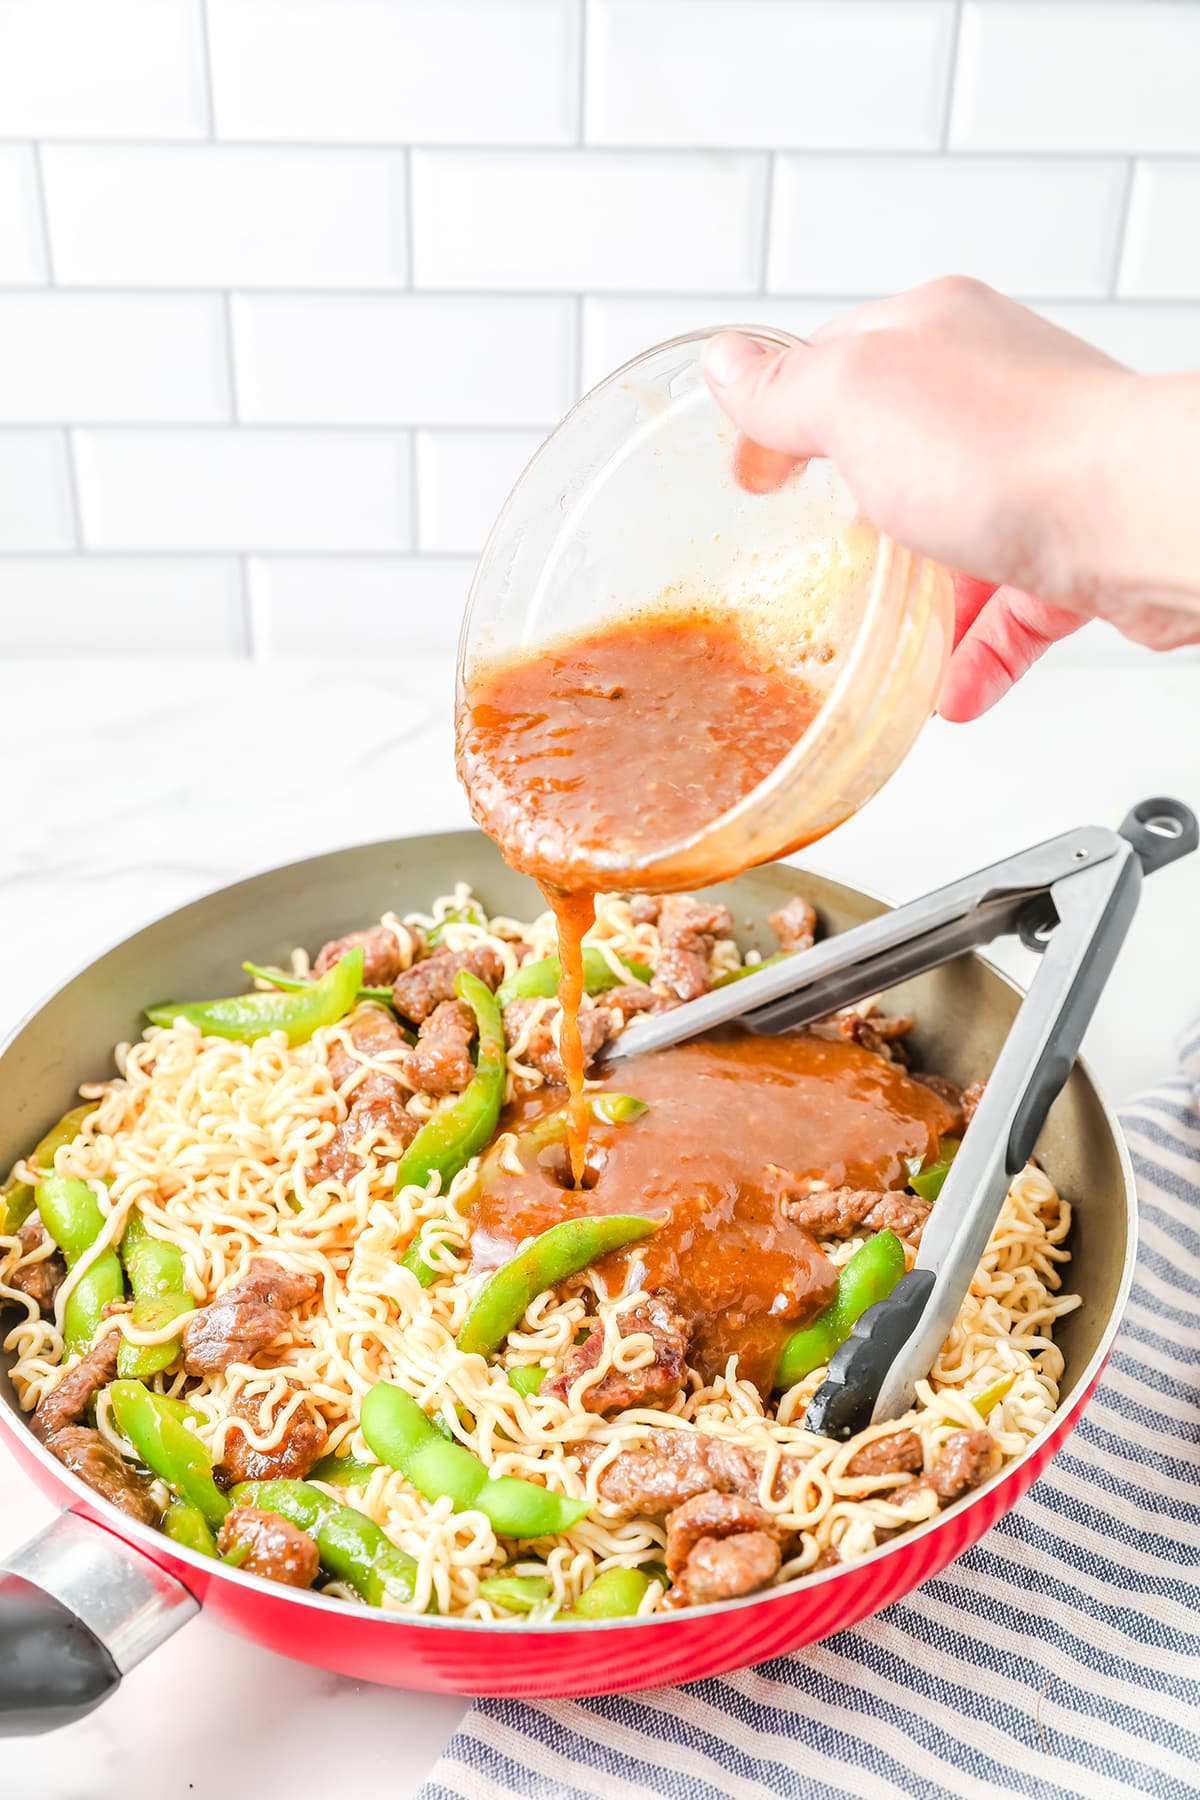 Mongolian ramen beef stir fry with additional thick sauce